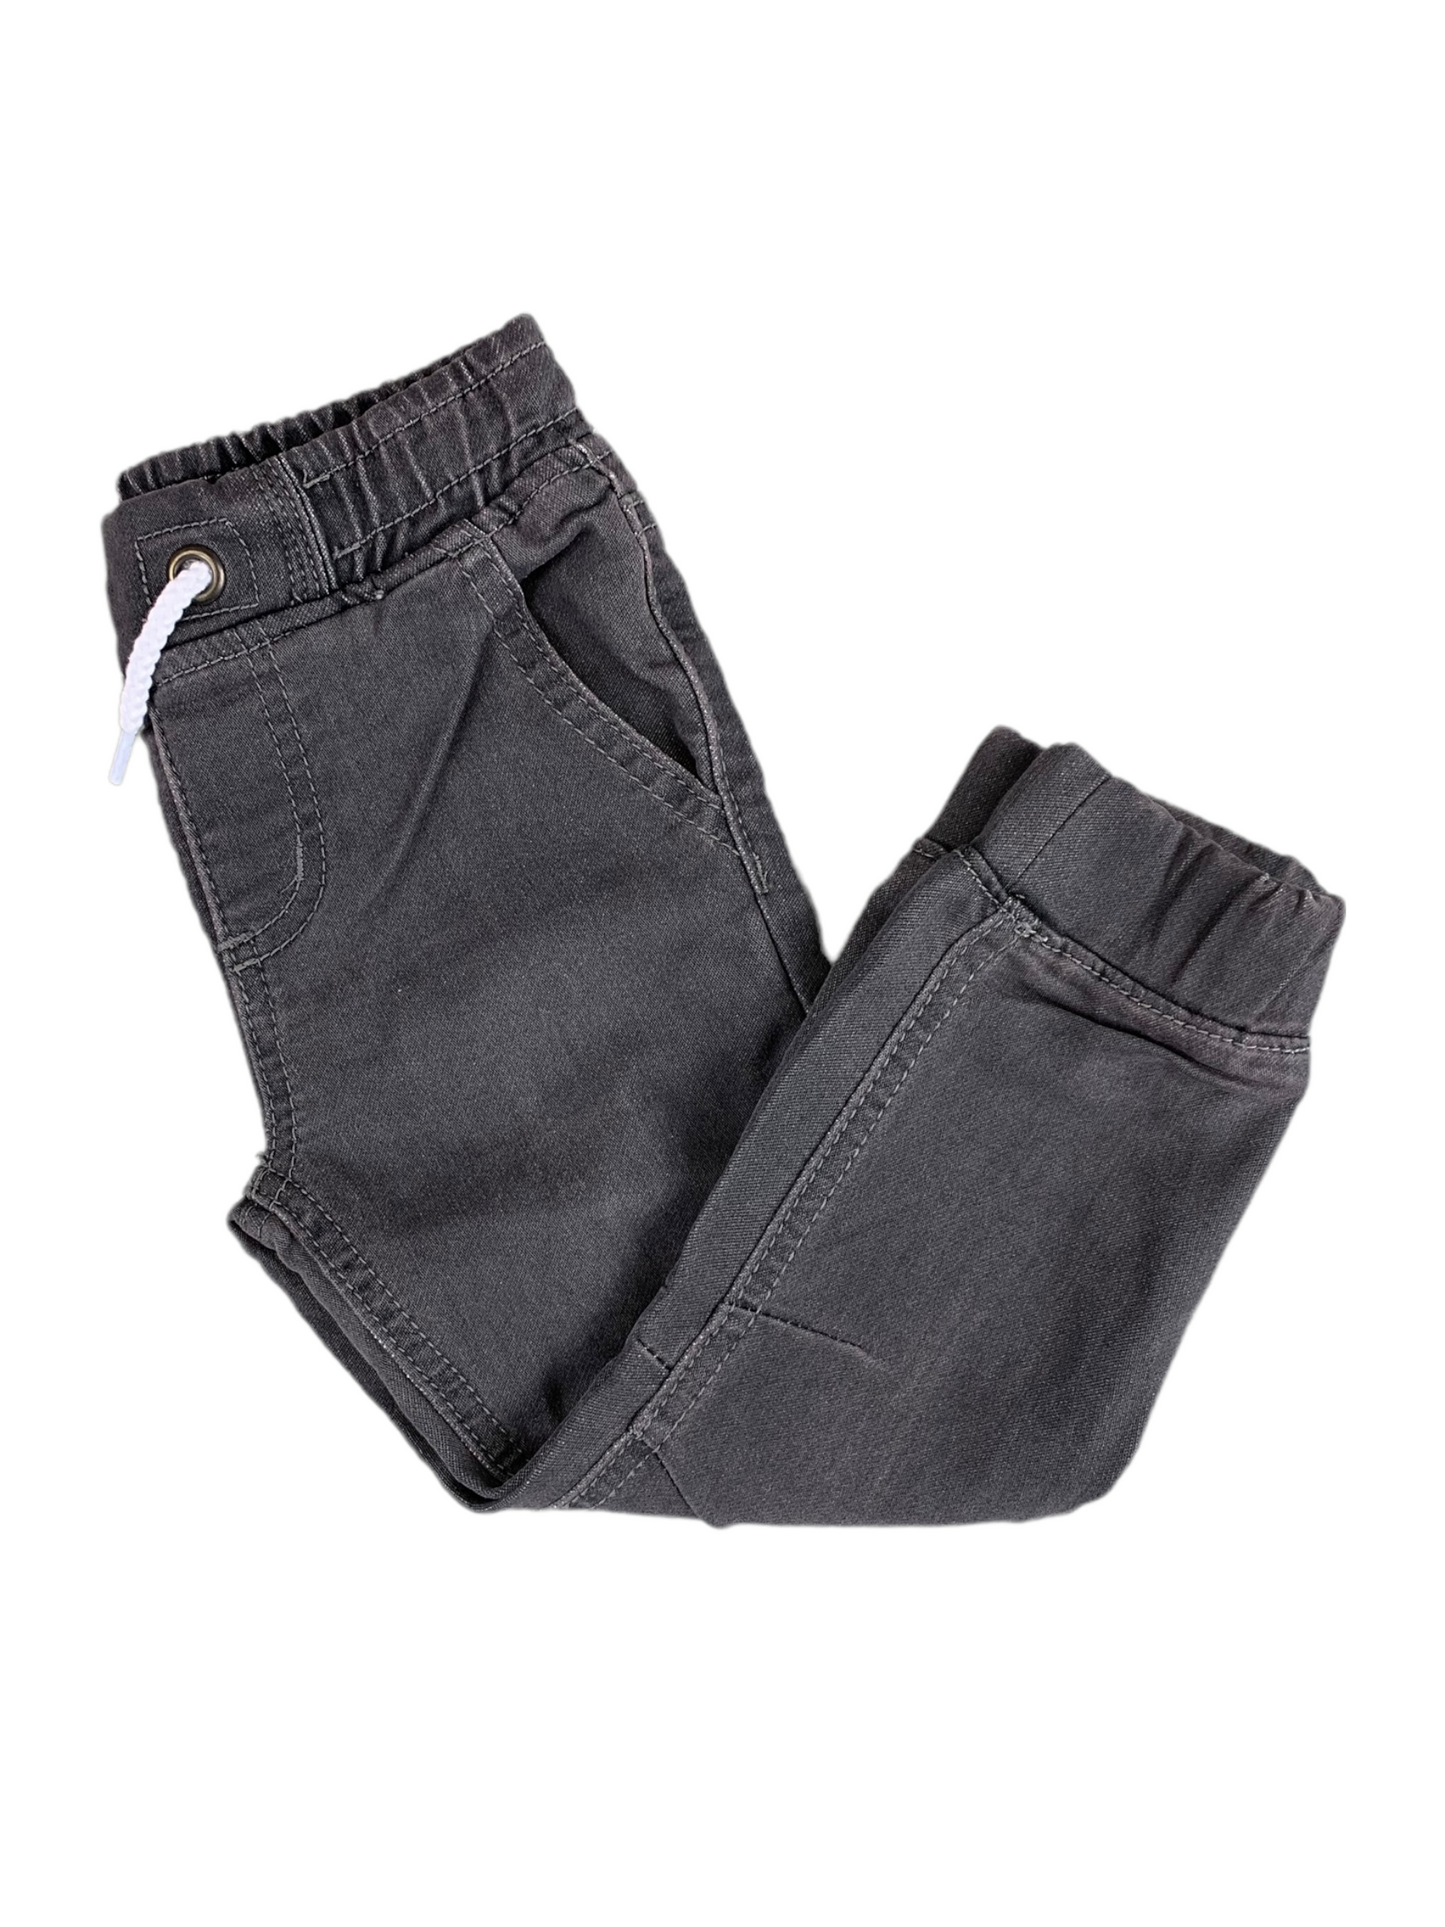 Gray jeans jogger Northcoast boy 2 to 7 years